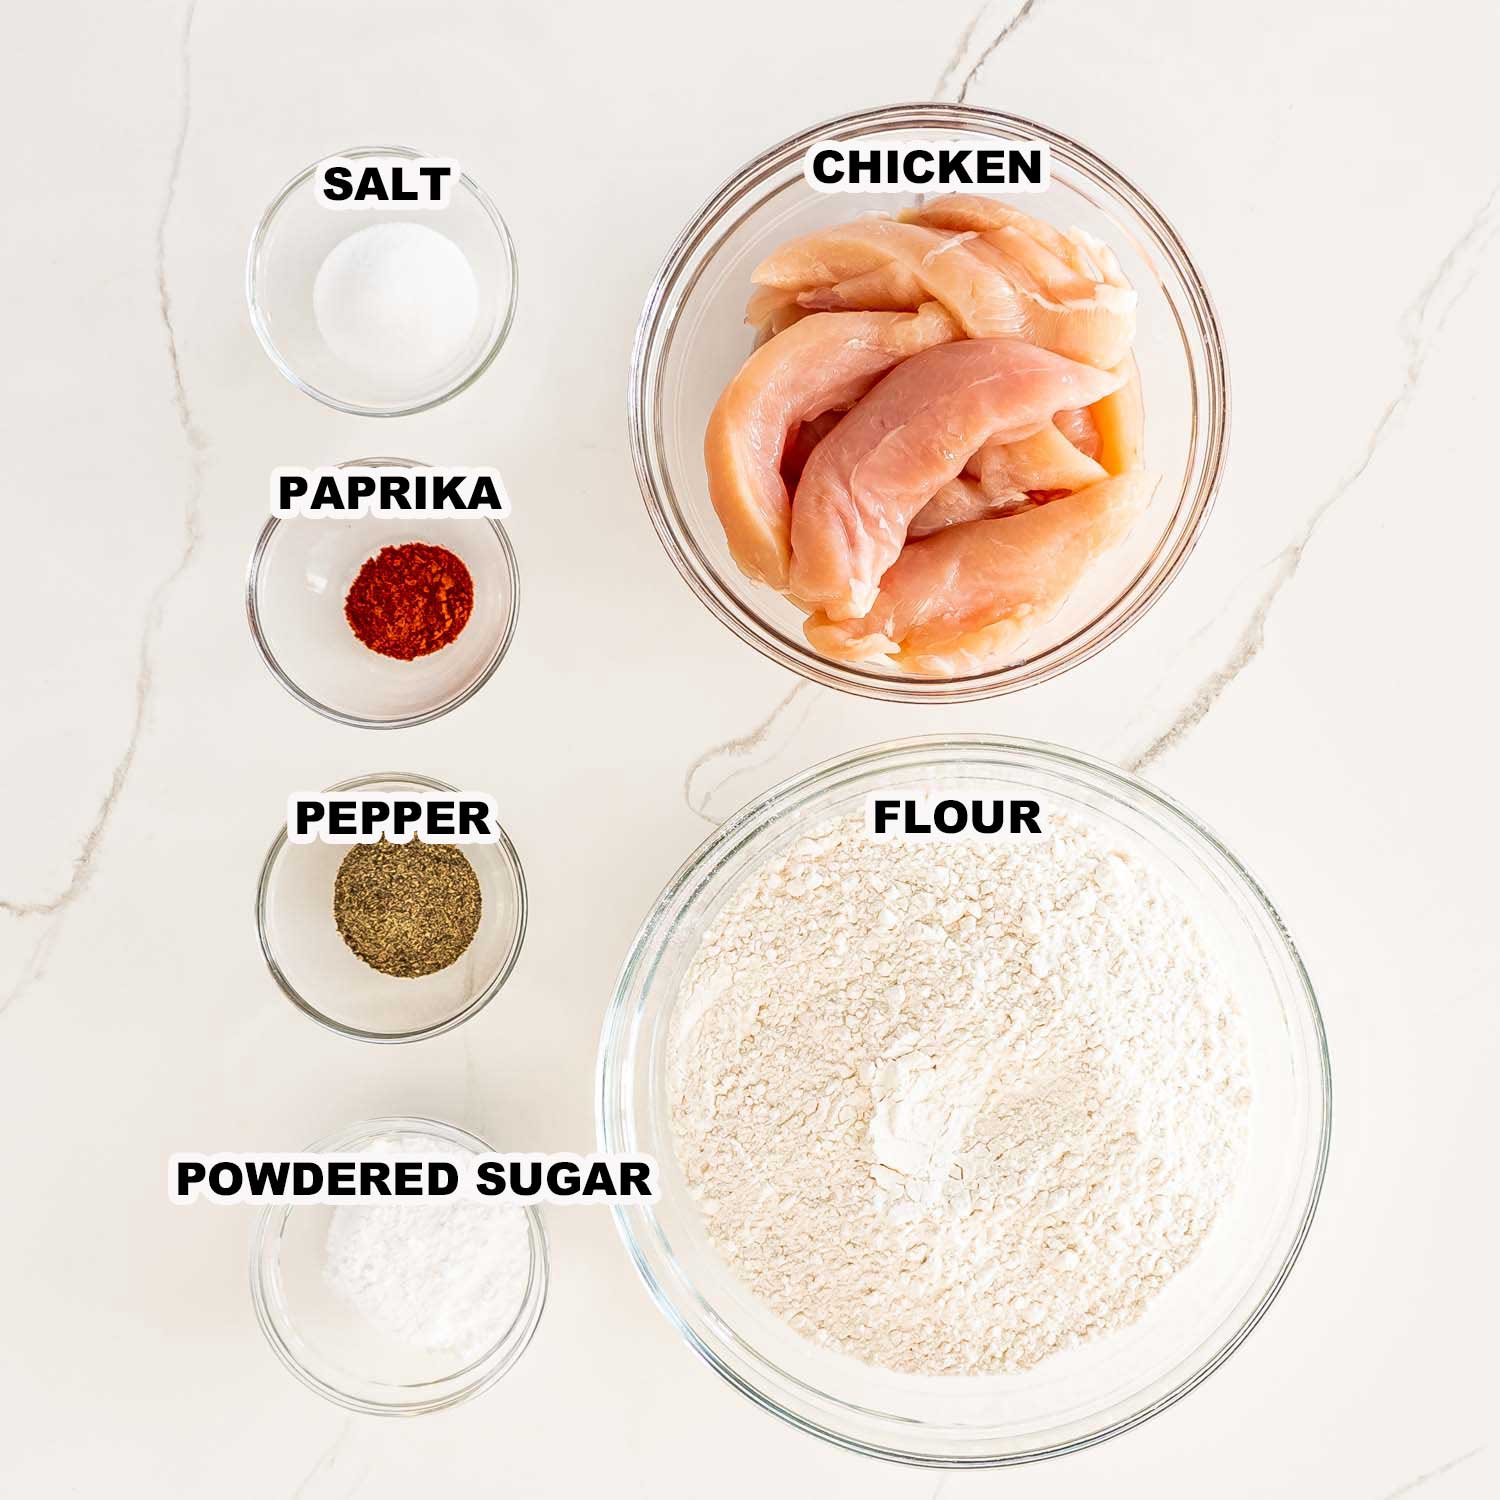 ingredients needed to make chicken poppers.